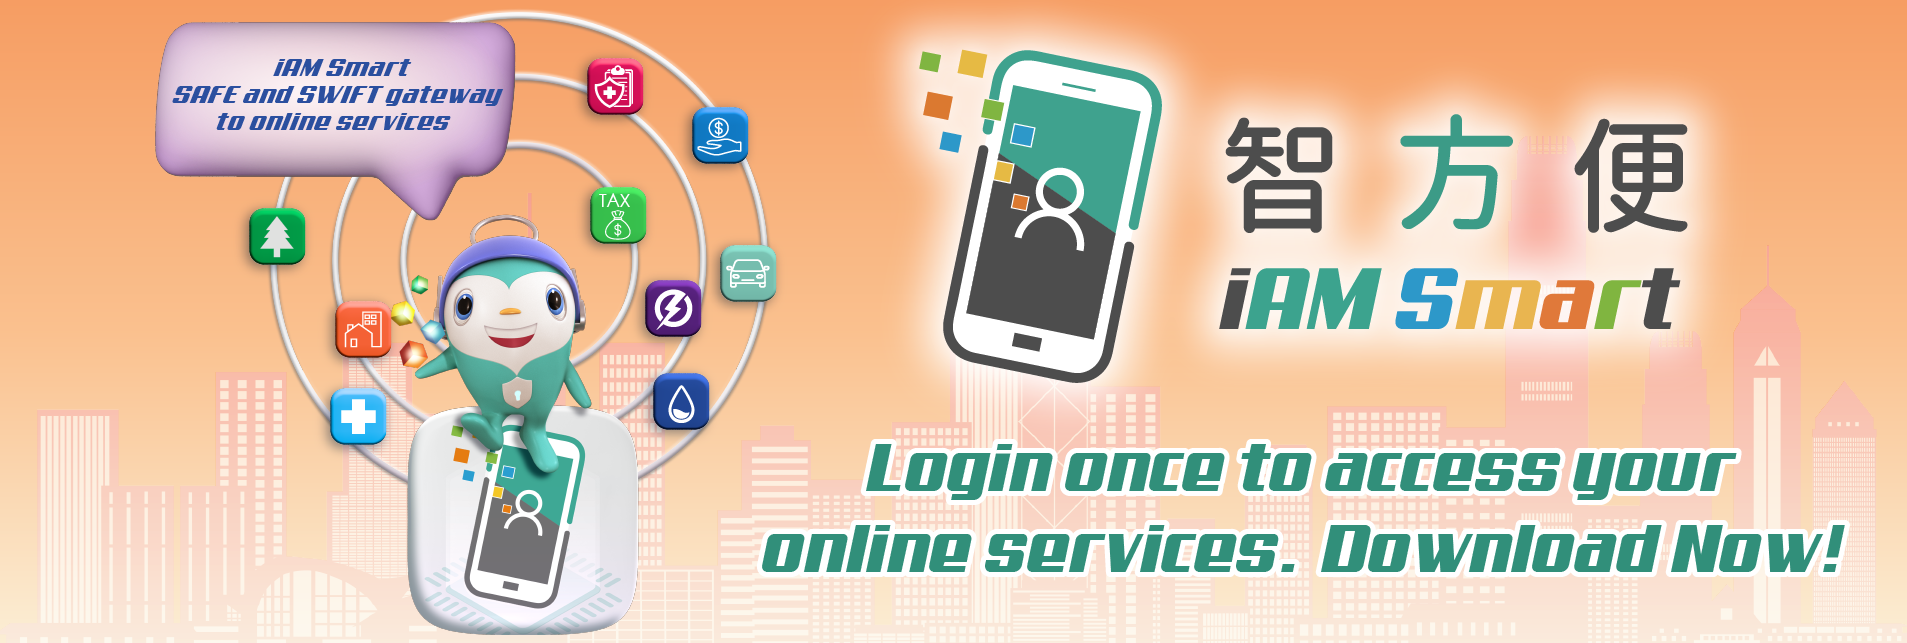 iAM Smart Safe and Swift gateway to online services.  Login once to access your online services. Download Now!